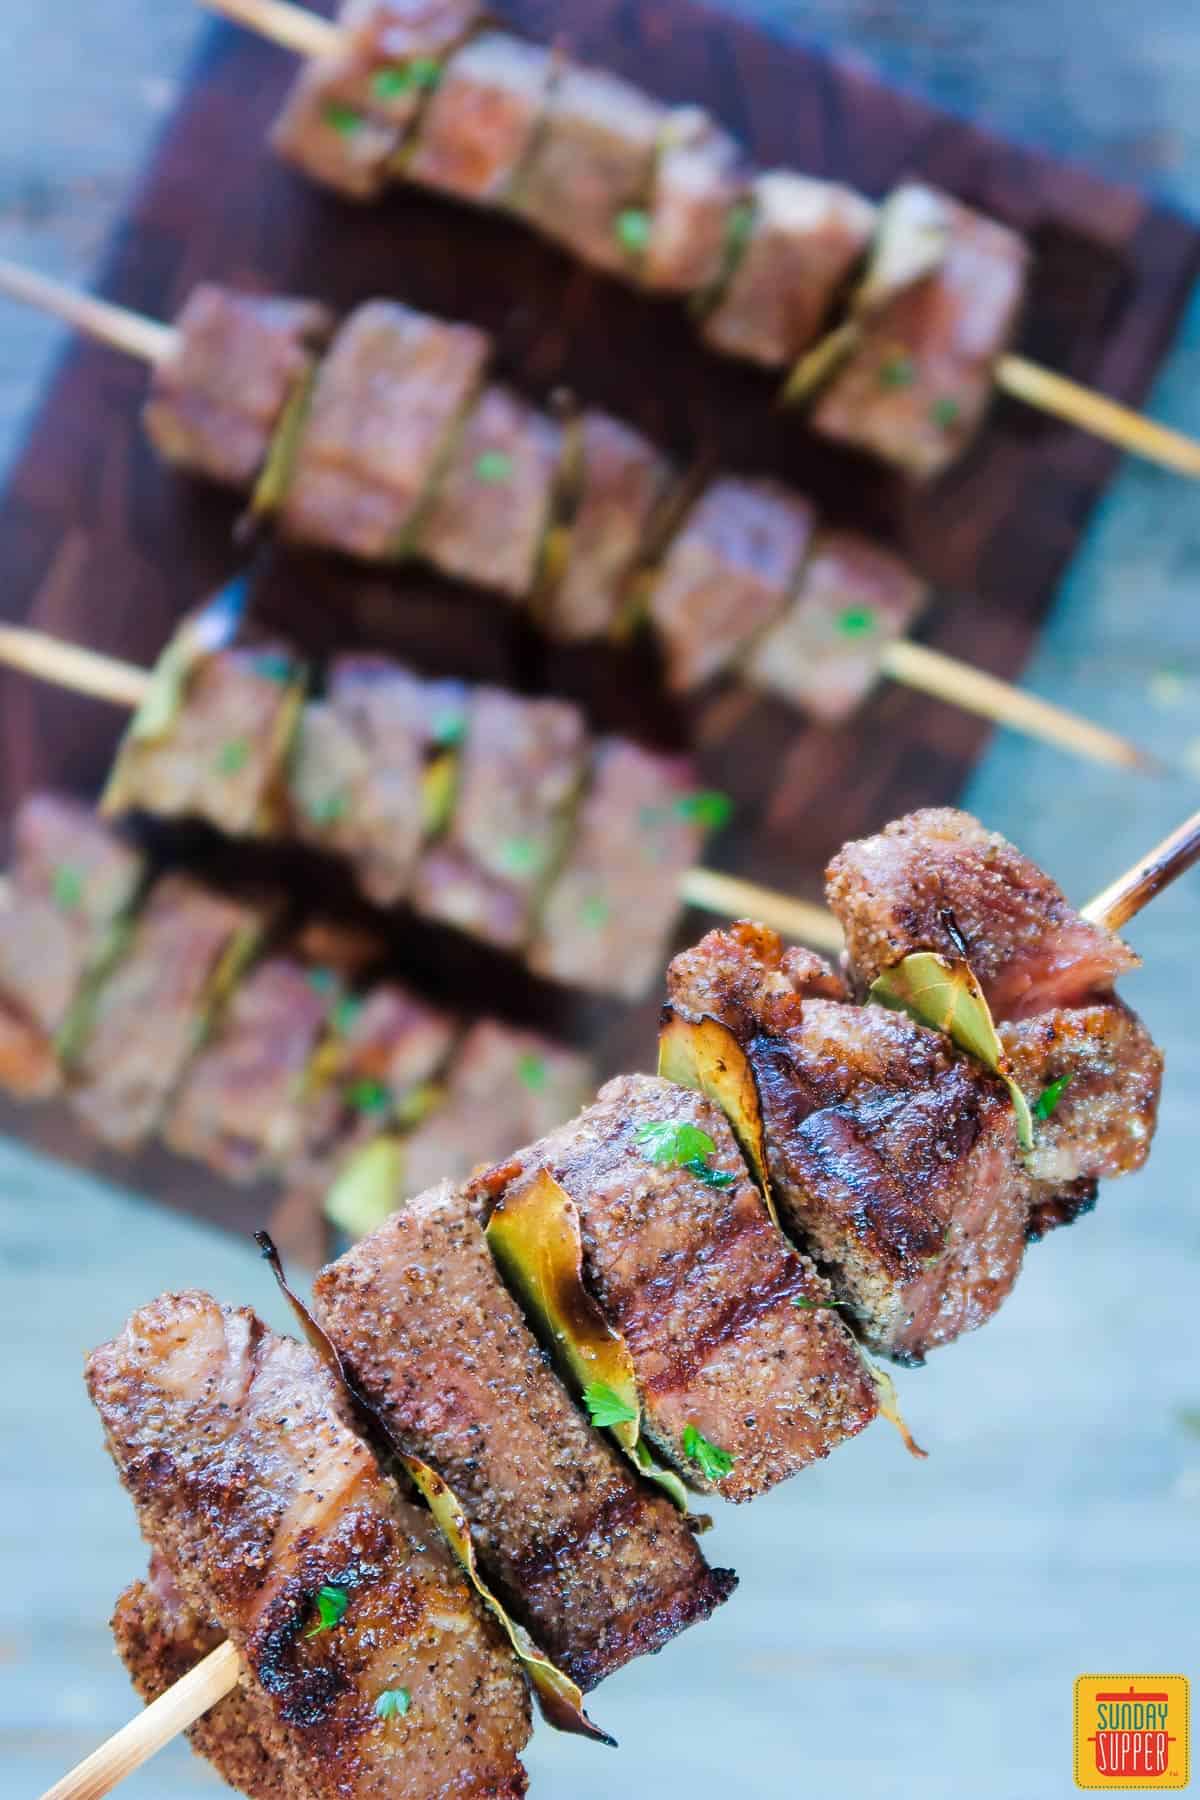 Holding up a Portuguese beef skewer after cooking it over a board of the other cooked skewers